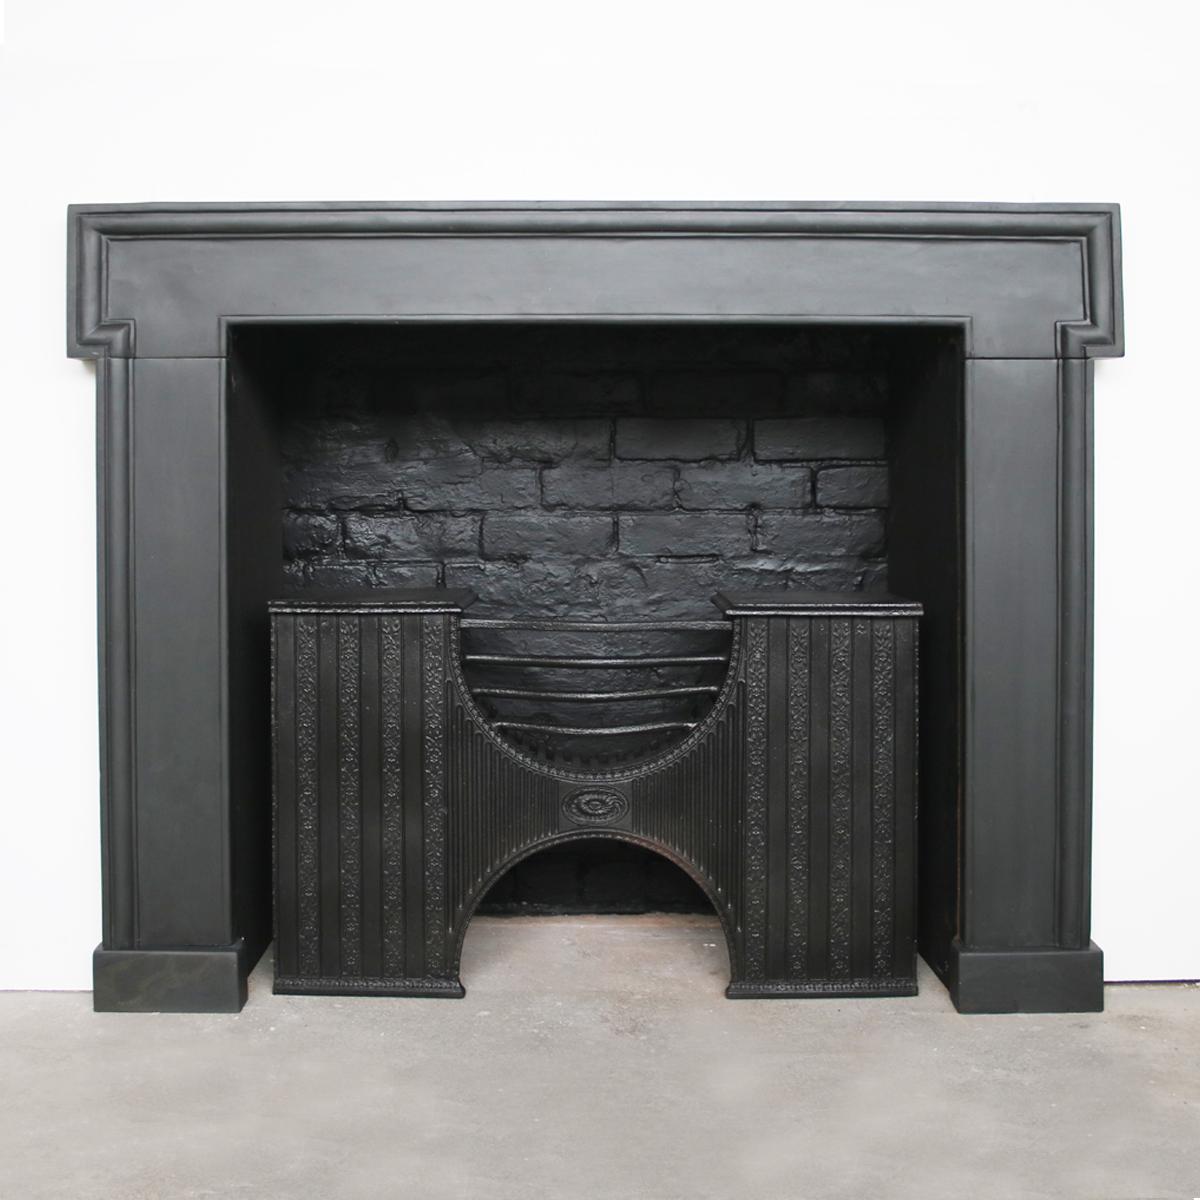 Antique 18th century Georgian slate fireplace surround of simple form with dog leg moulding. 

Pictured with an original Georgian cast iron hob grate, priced separately.